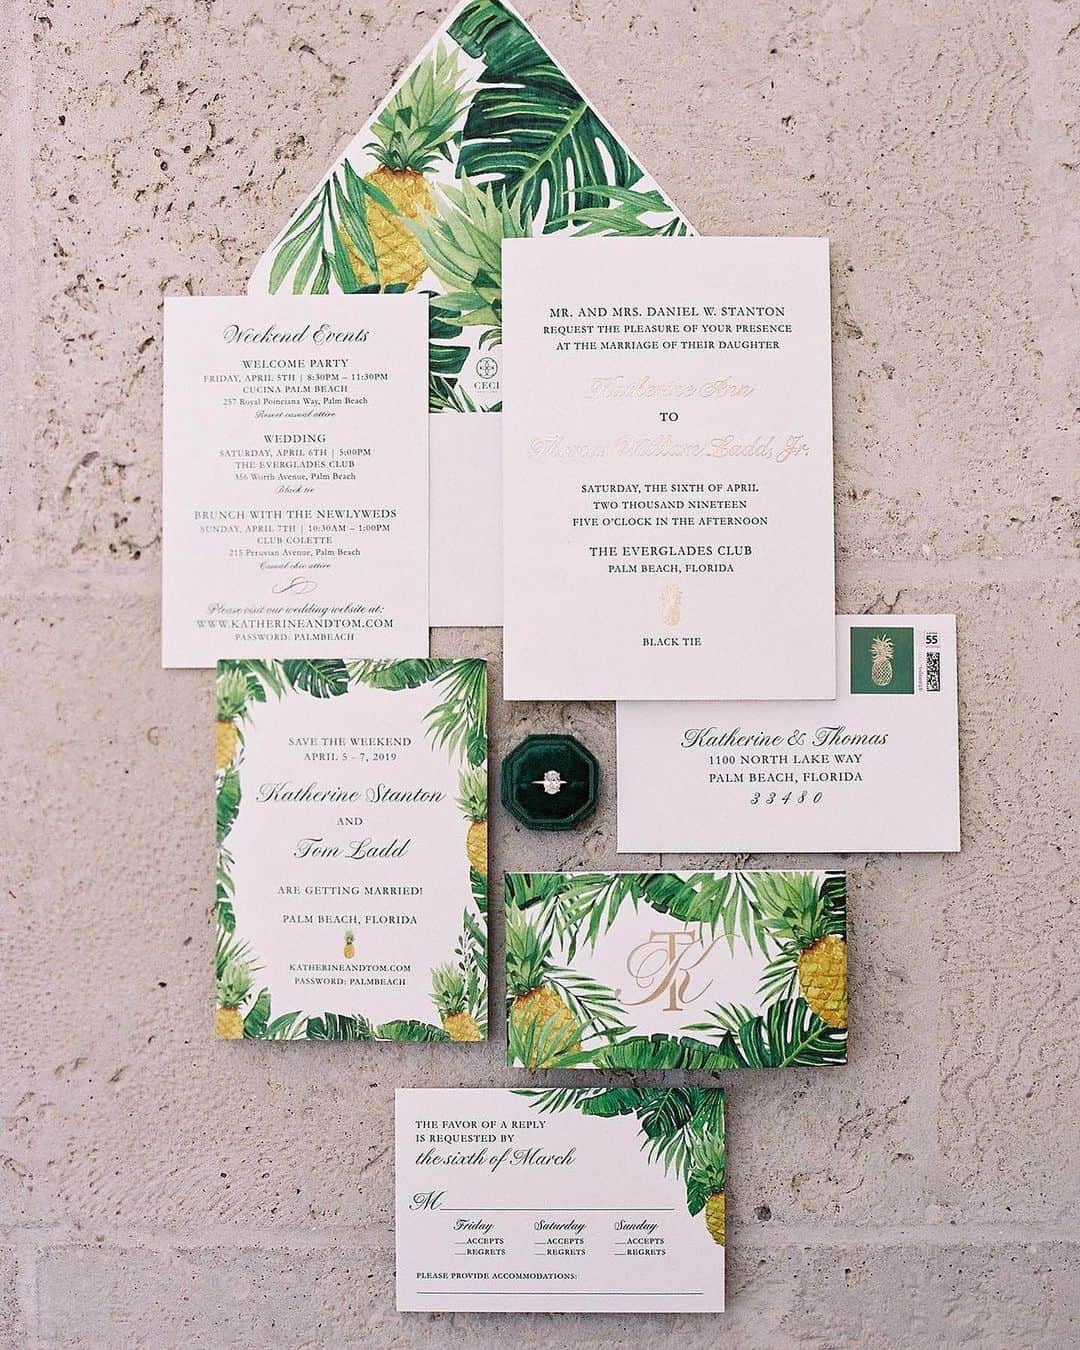 Ceci Johnsonのインスタグラム：「A perfect weekend for a wedding. Thank you to @poshpartygal for reminding us of this gorgeous palm-themed #palmbeachwedding 🌴   The couple personalized our ‘Golden Pineapple’ Wedding Collection and we added a custom monogram for their design.  Wedding Invitations and monogram design: @cecinewyork  Photographer: @erickelley  Planner: @poshpartygal   #palmbeachstyle  #palmbeachbride  #palmbeachwedding  #tropicalinvitations  #tropicalwedding  #weddinginvitation  #weddinginspiration  #cecinewyork  #beautifyyourworld」